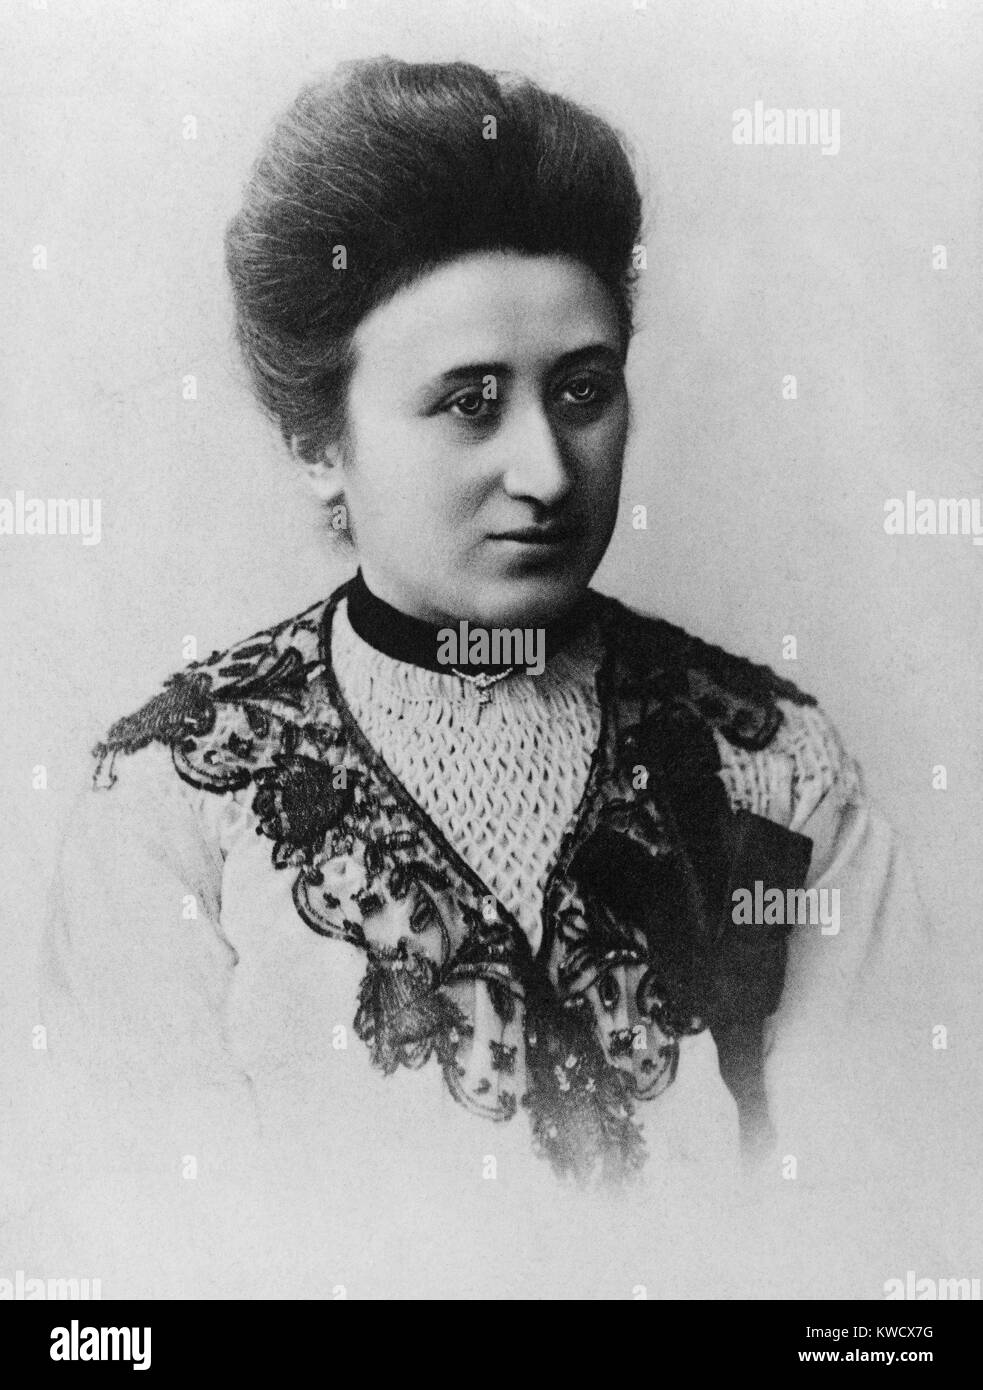 Rosa Luxemburg, was a Polish born German Communist revolutionary leader. In 1914, she joined Karl Liebknecht and others to found the Spartacus League, which played a violent role in the German Revolution of 1918-1919 (BSLOC 2017 2 57) Stock Photo